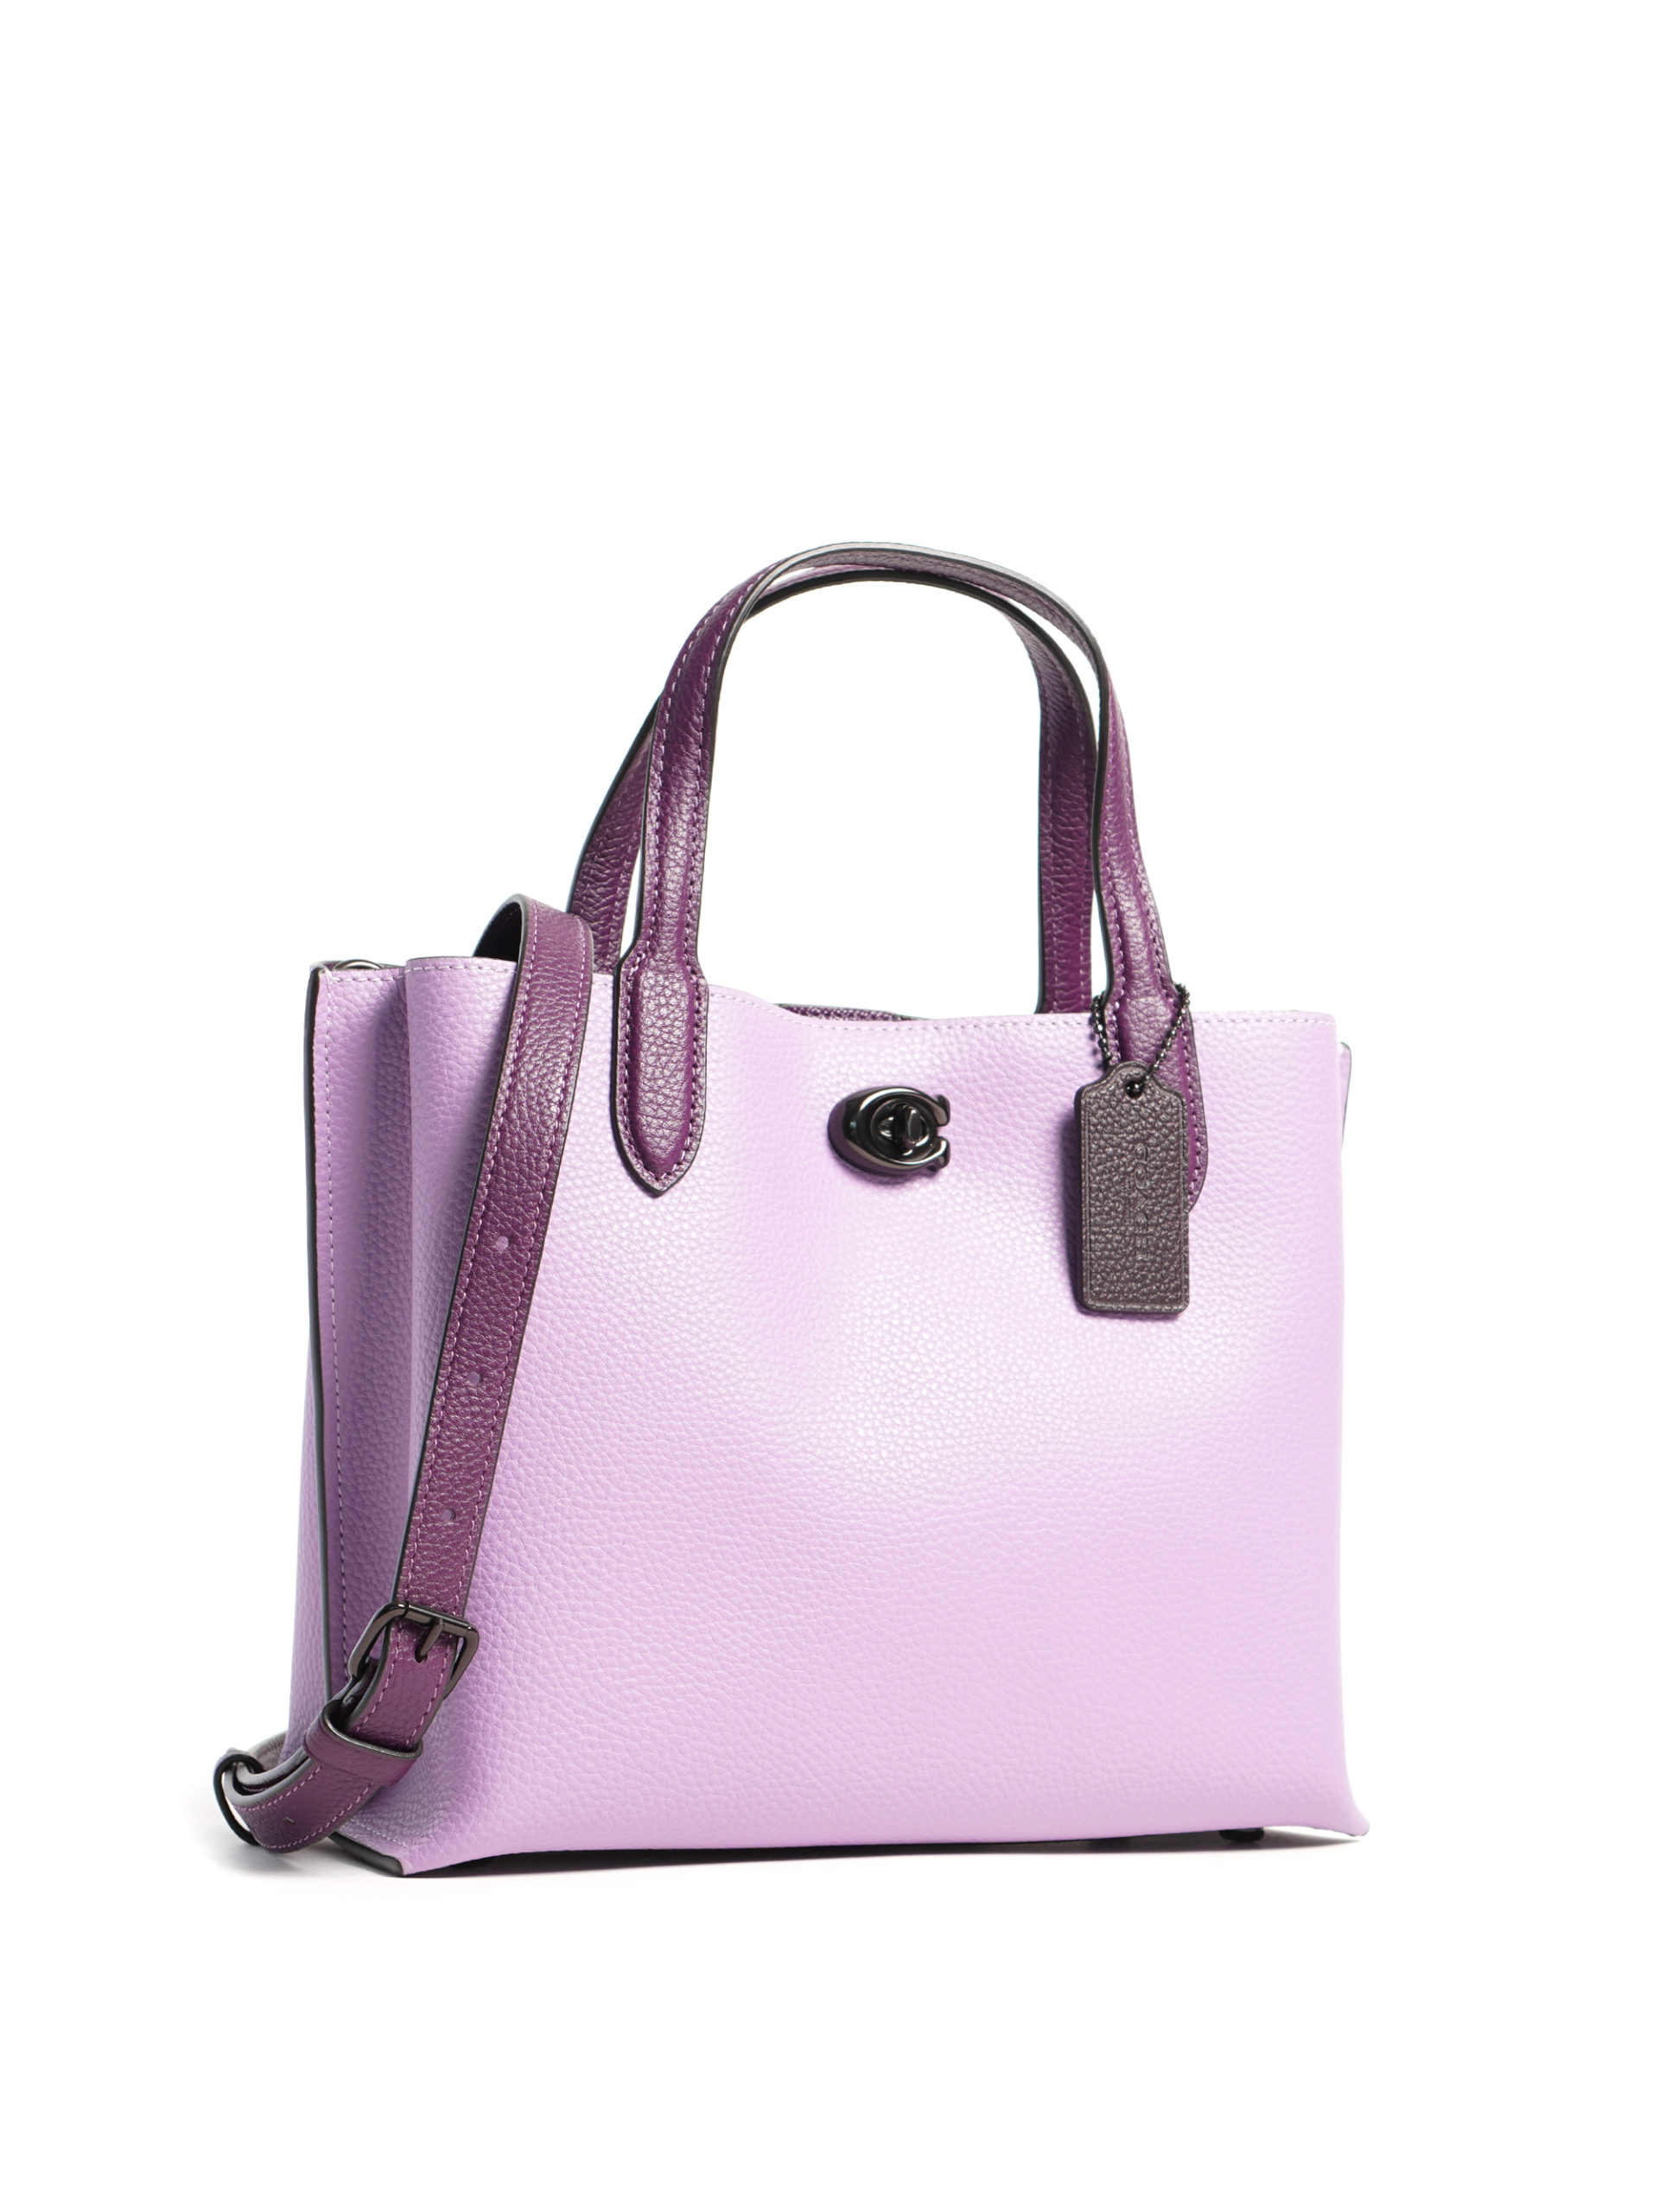 NWT Coach Leather WILLOW Tote 24 /COLOR:Pewter/Violet Orchid